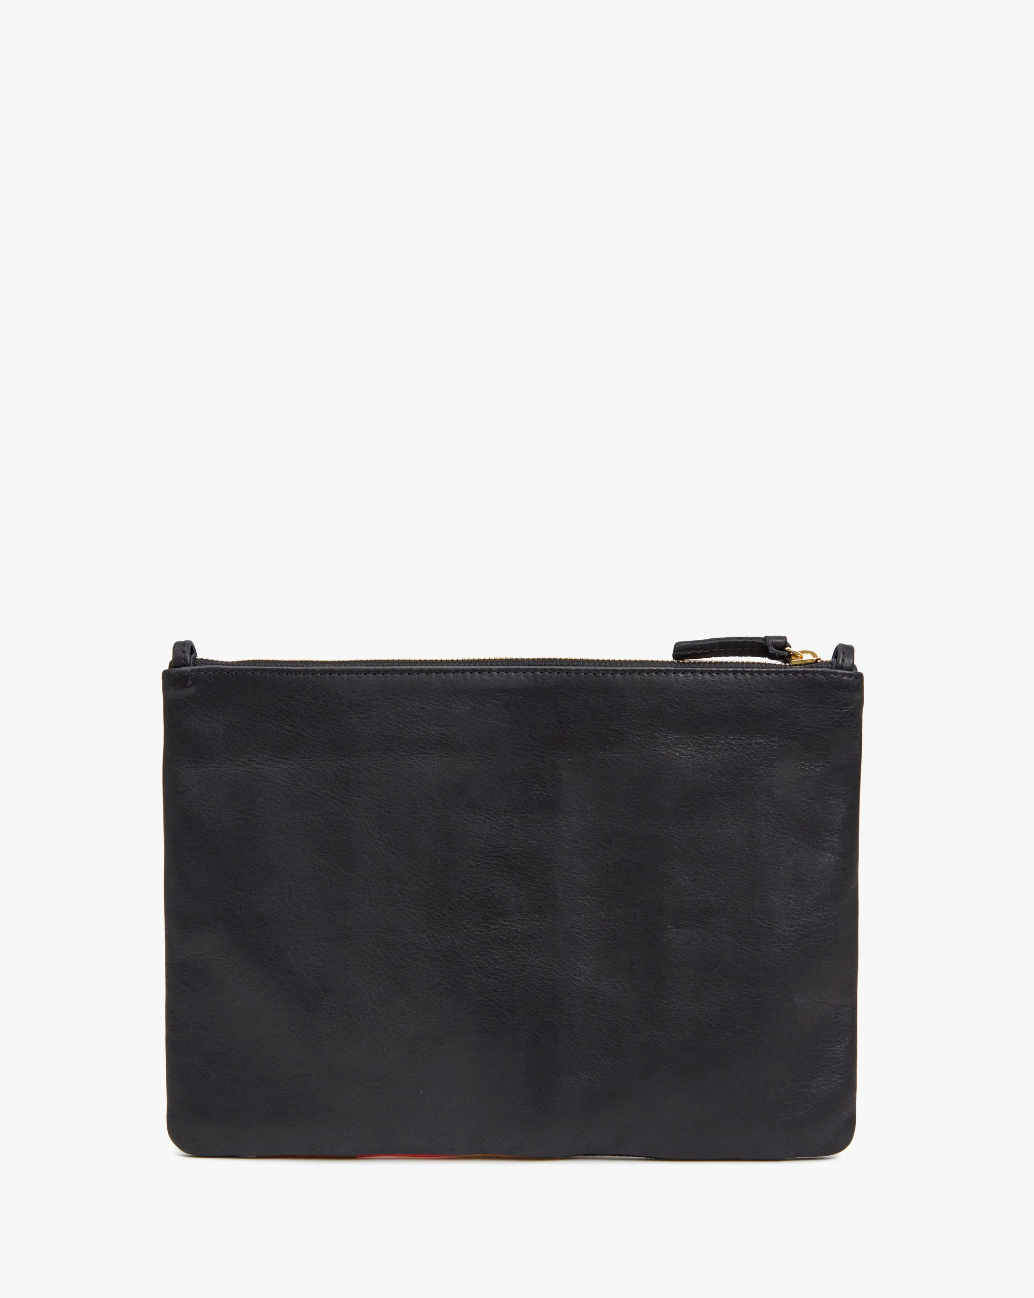 Clare V  | Flat Clutch with Tabs - Multi Patchwork